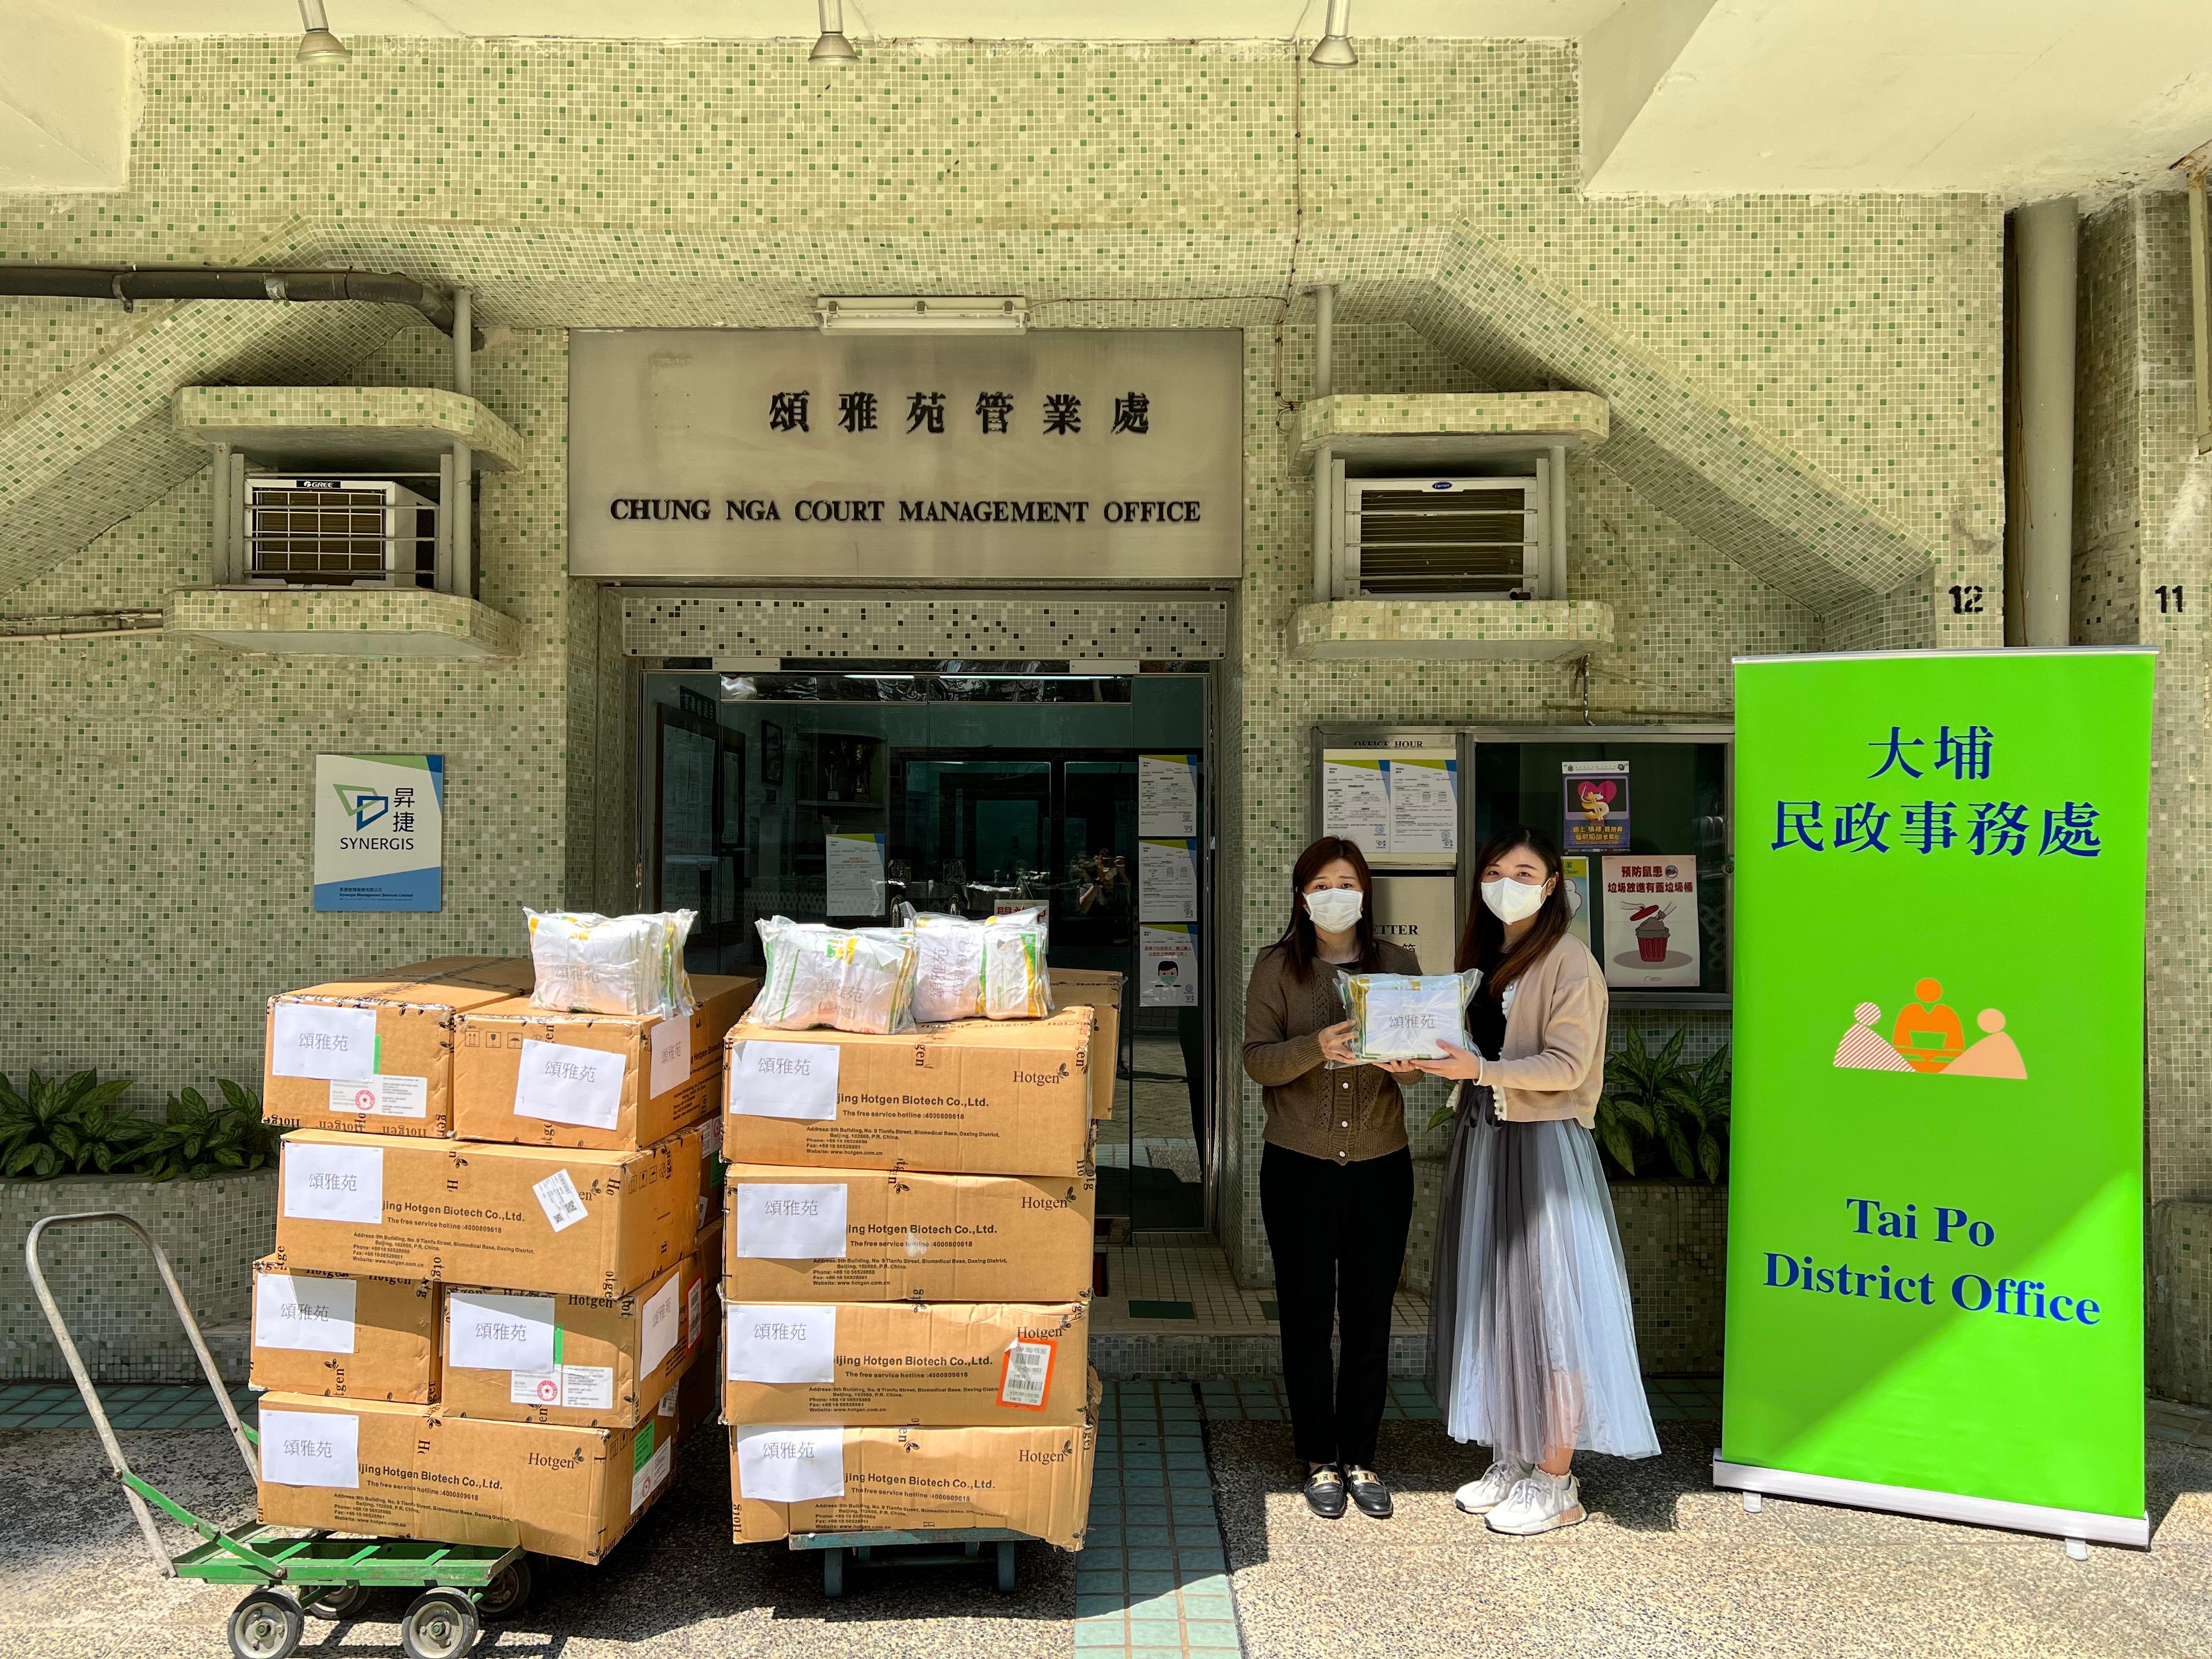 The Tai Po District Office distributed COVID-19 rapid test kits to households, cleansing workers and property management staff living and working in Chung Nga Court for voluntary testing through the property management company.